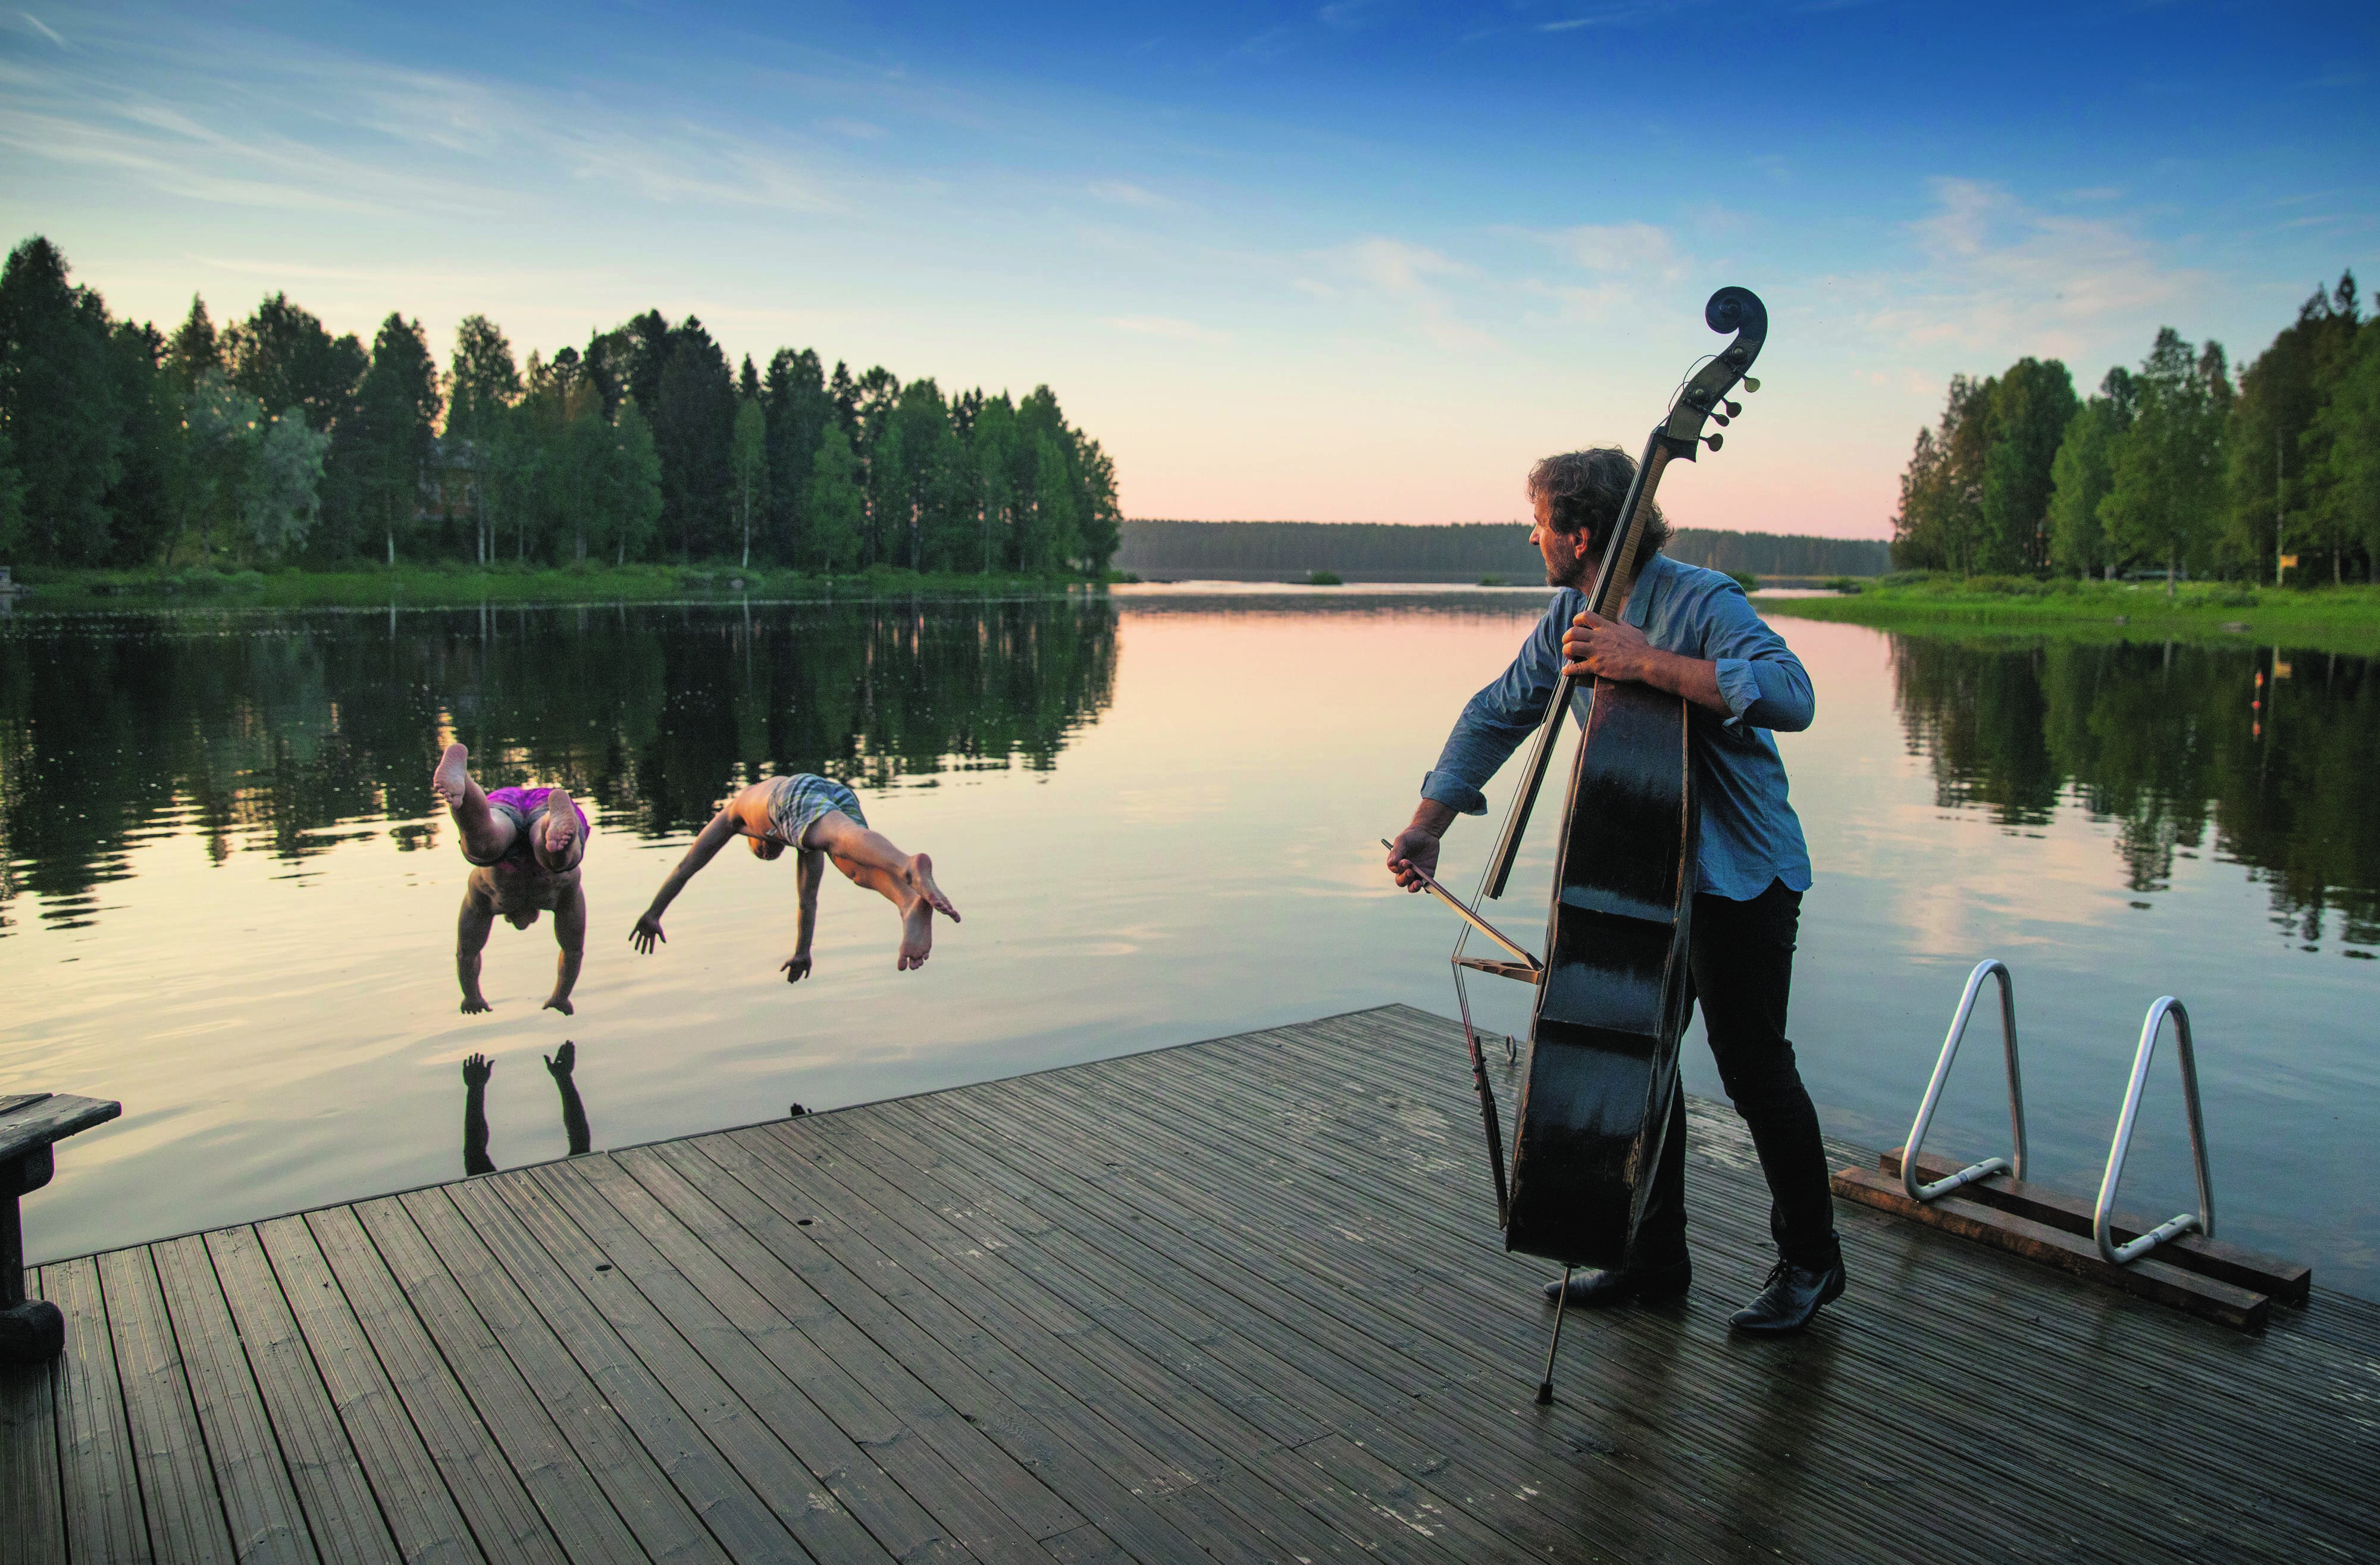 a man playing a cello in a pier while people jumping to a water in the Finnish Lakeland